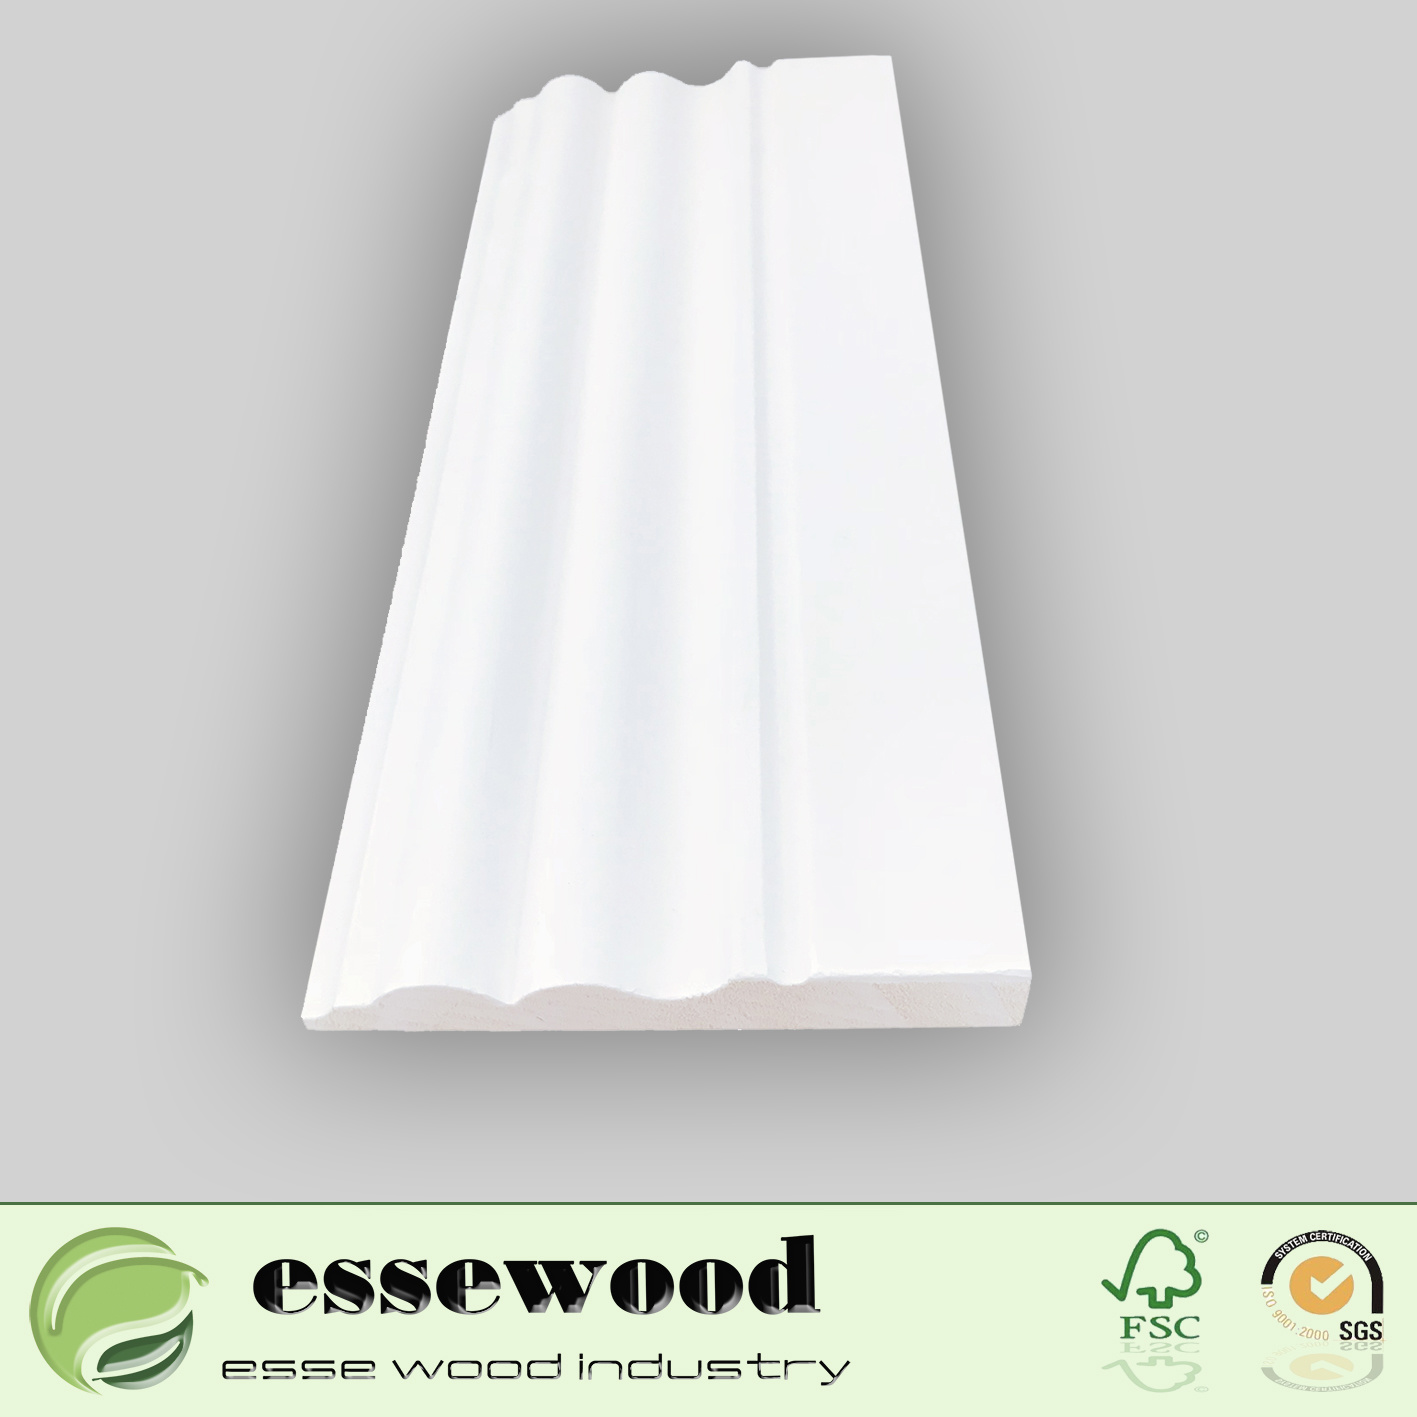 Different Types of Moulding and Millwork Laminated Wooden Skirting Boards